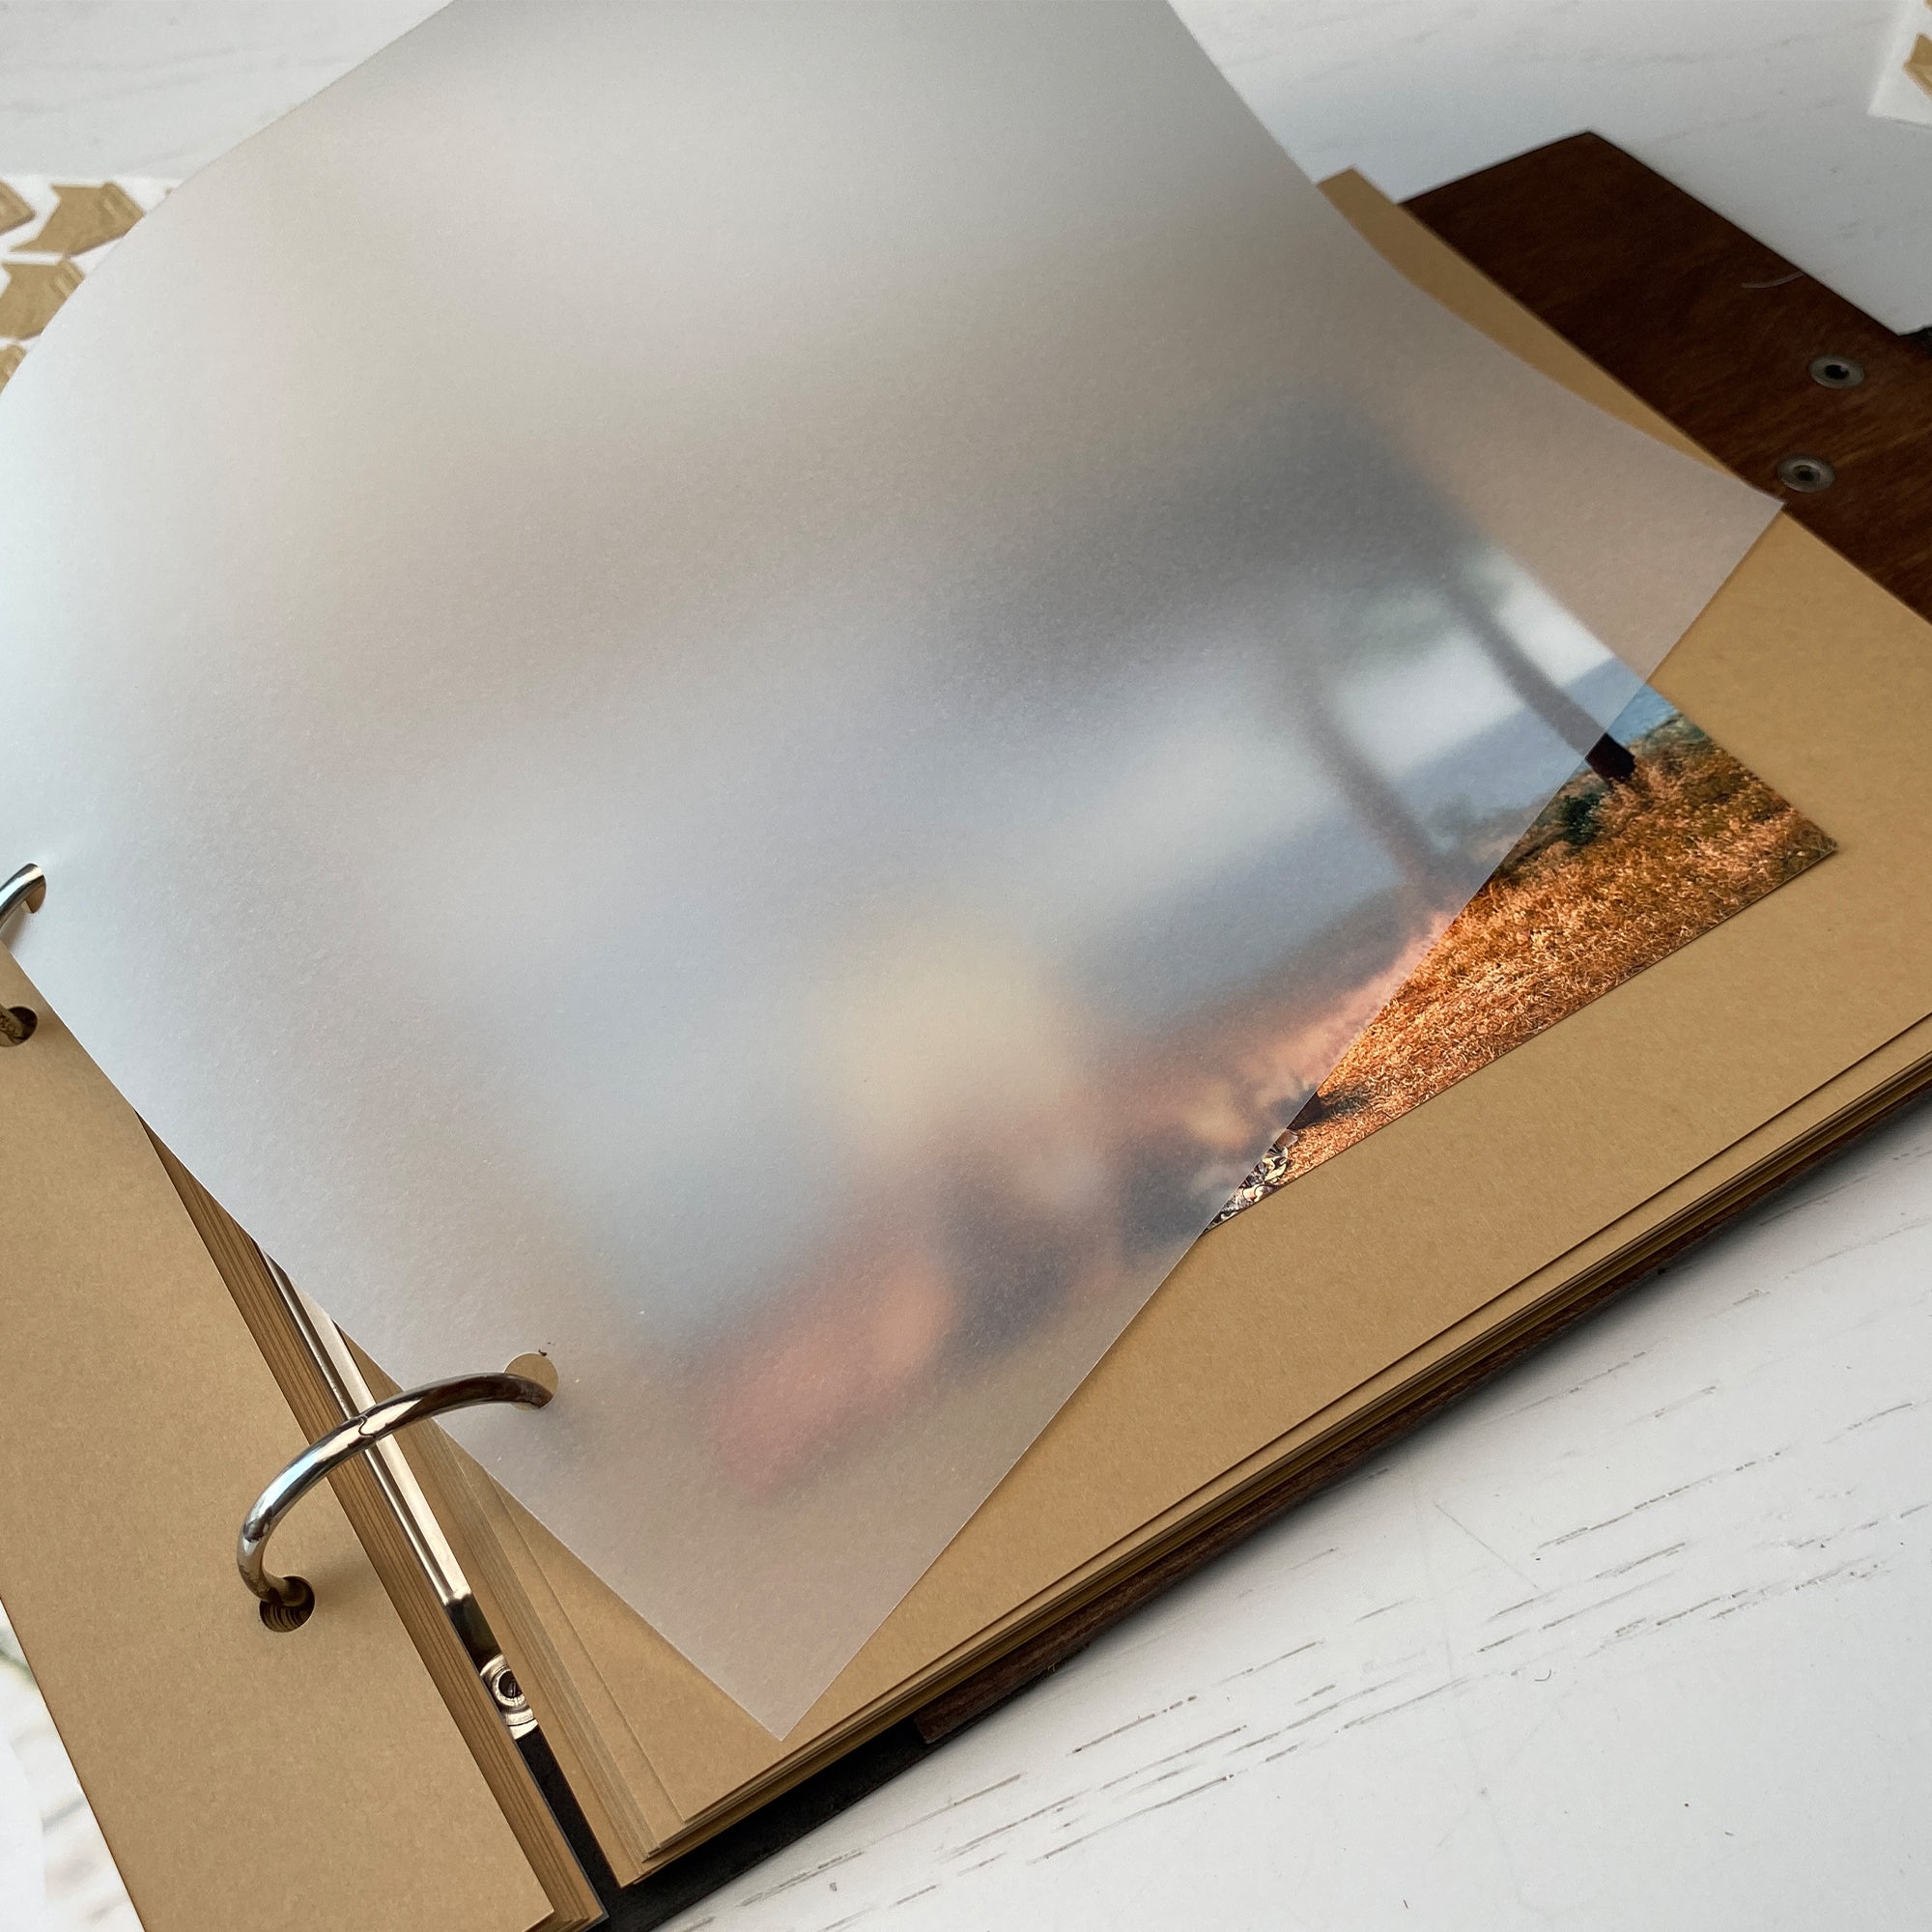 Personalized photo album with leather cover and Wedding day engraving